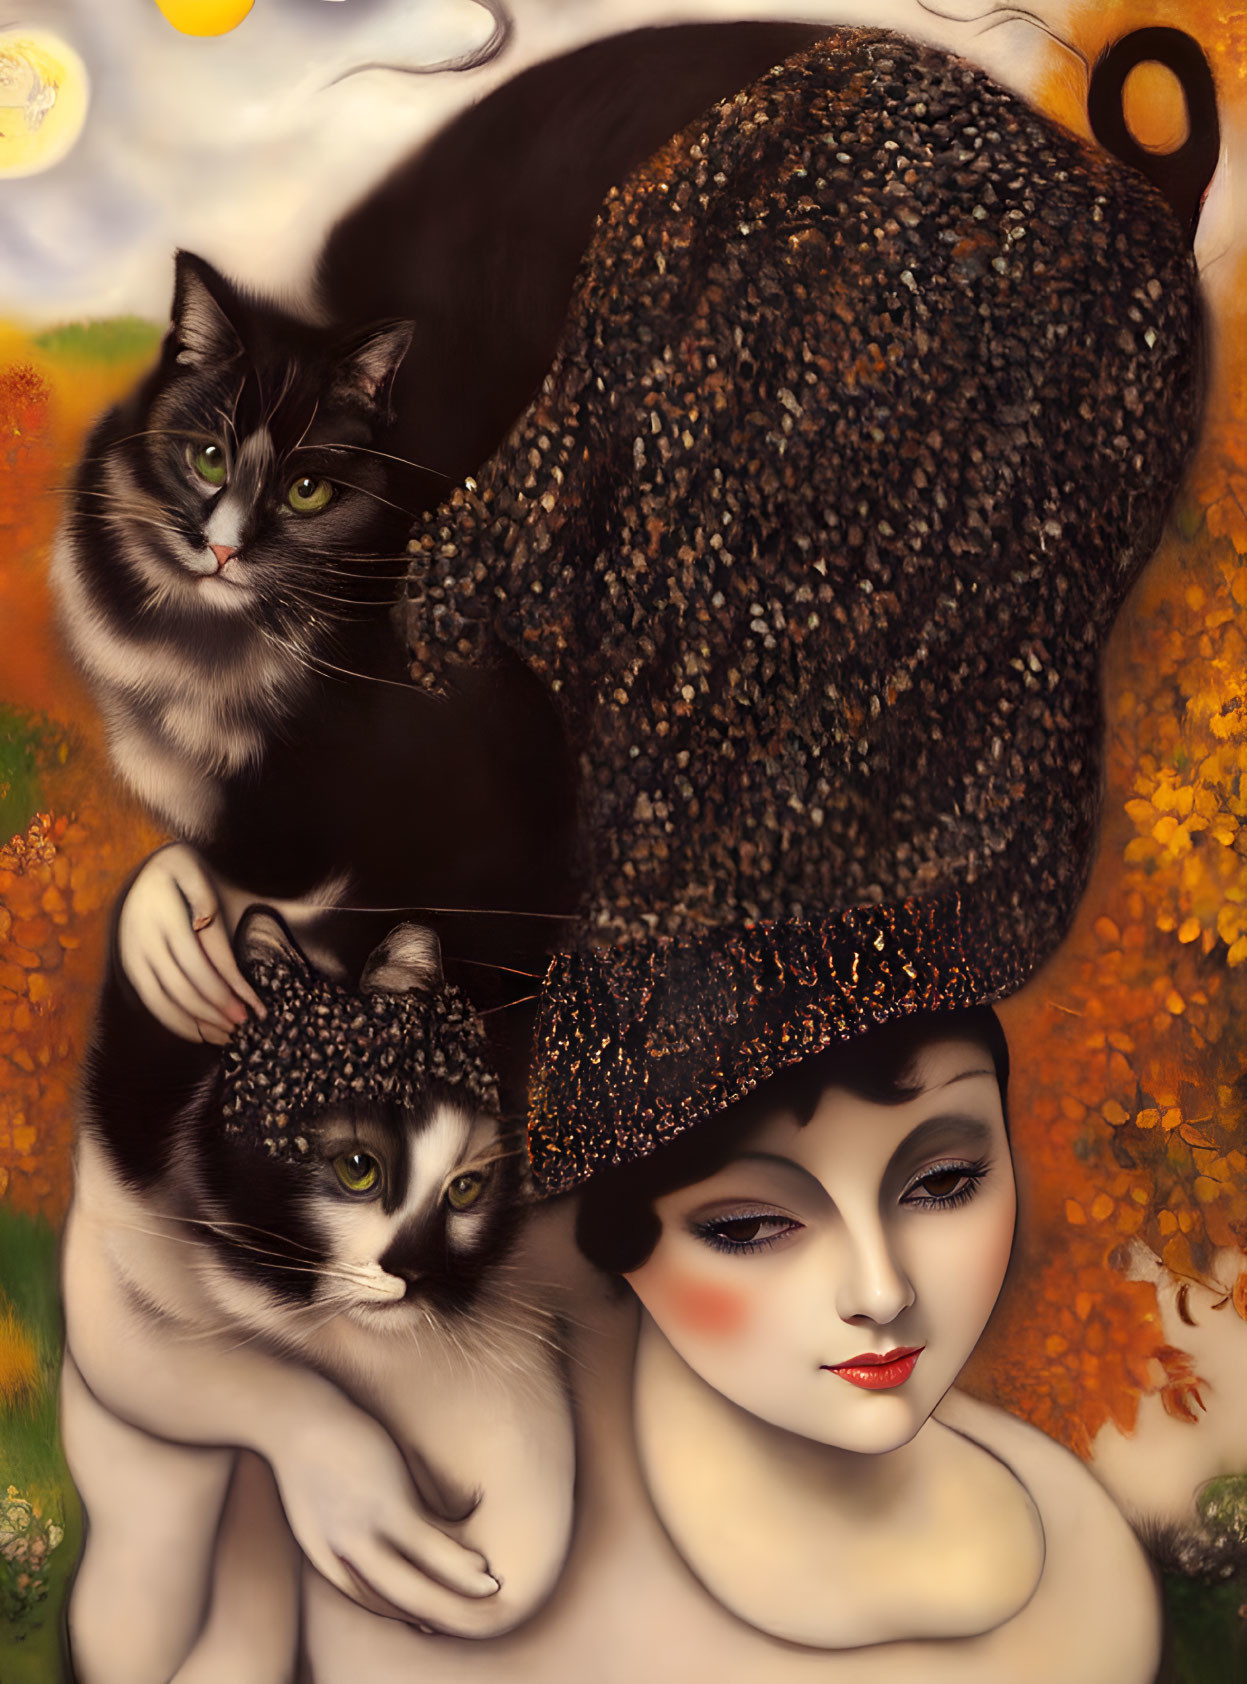 Woman with cats in autumn setting surrounded by bees - serene painting